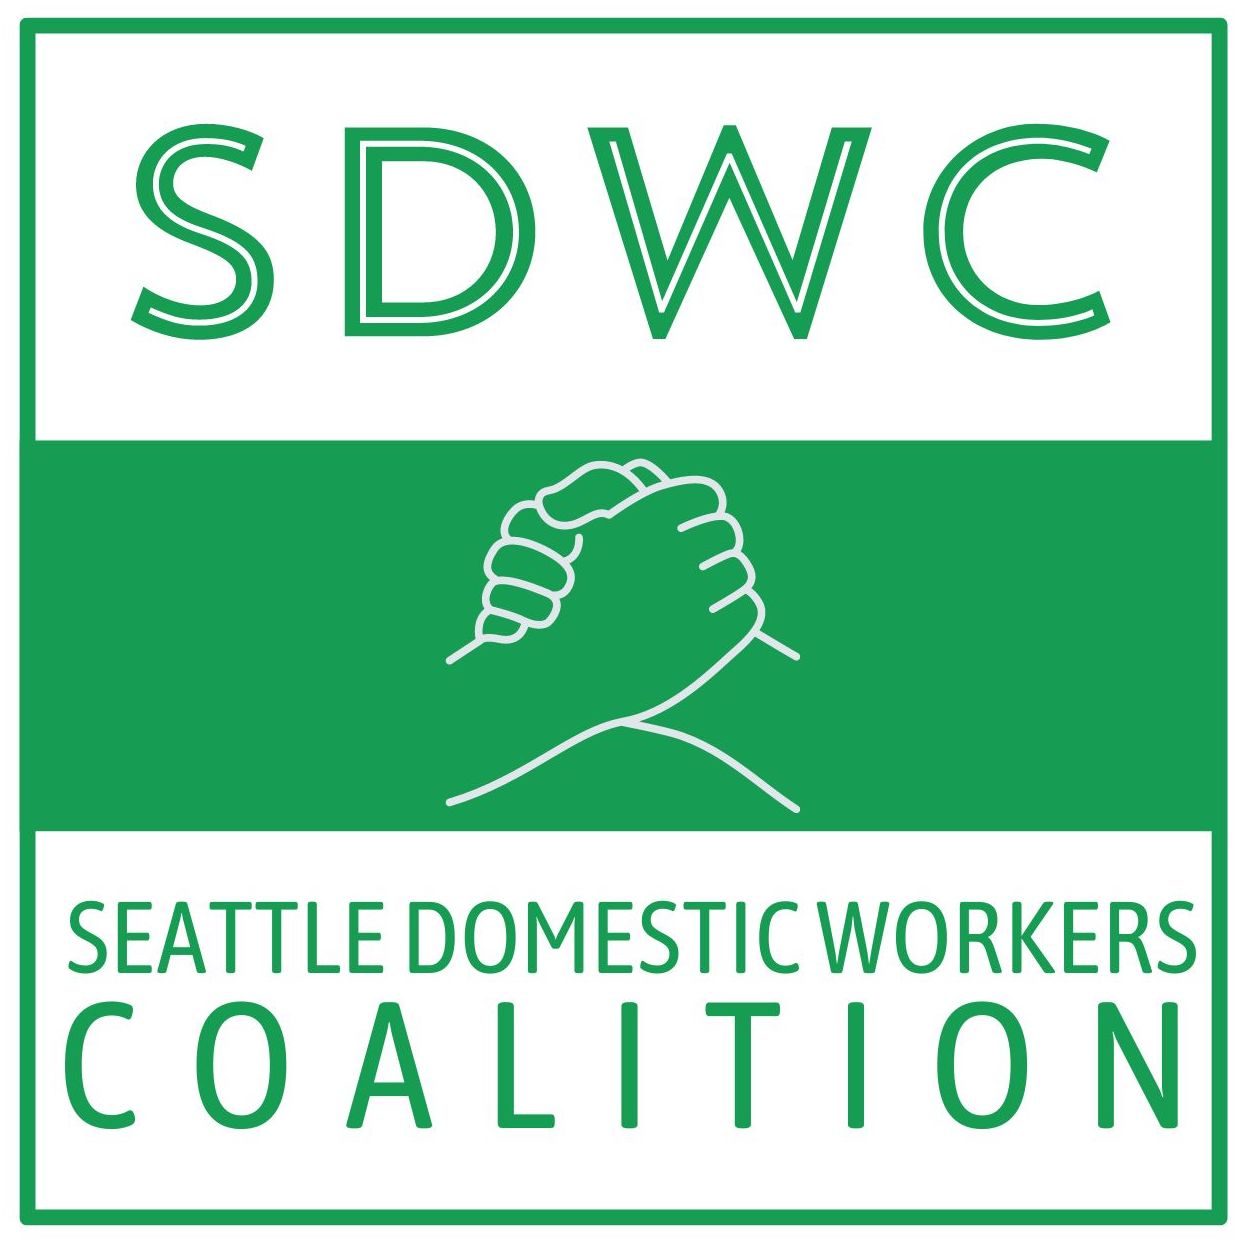 SEATTLE DOMESTIC WORKERS COALITION